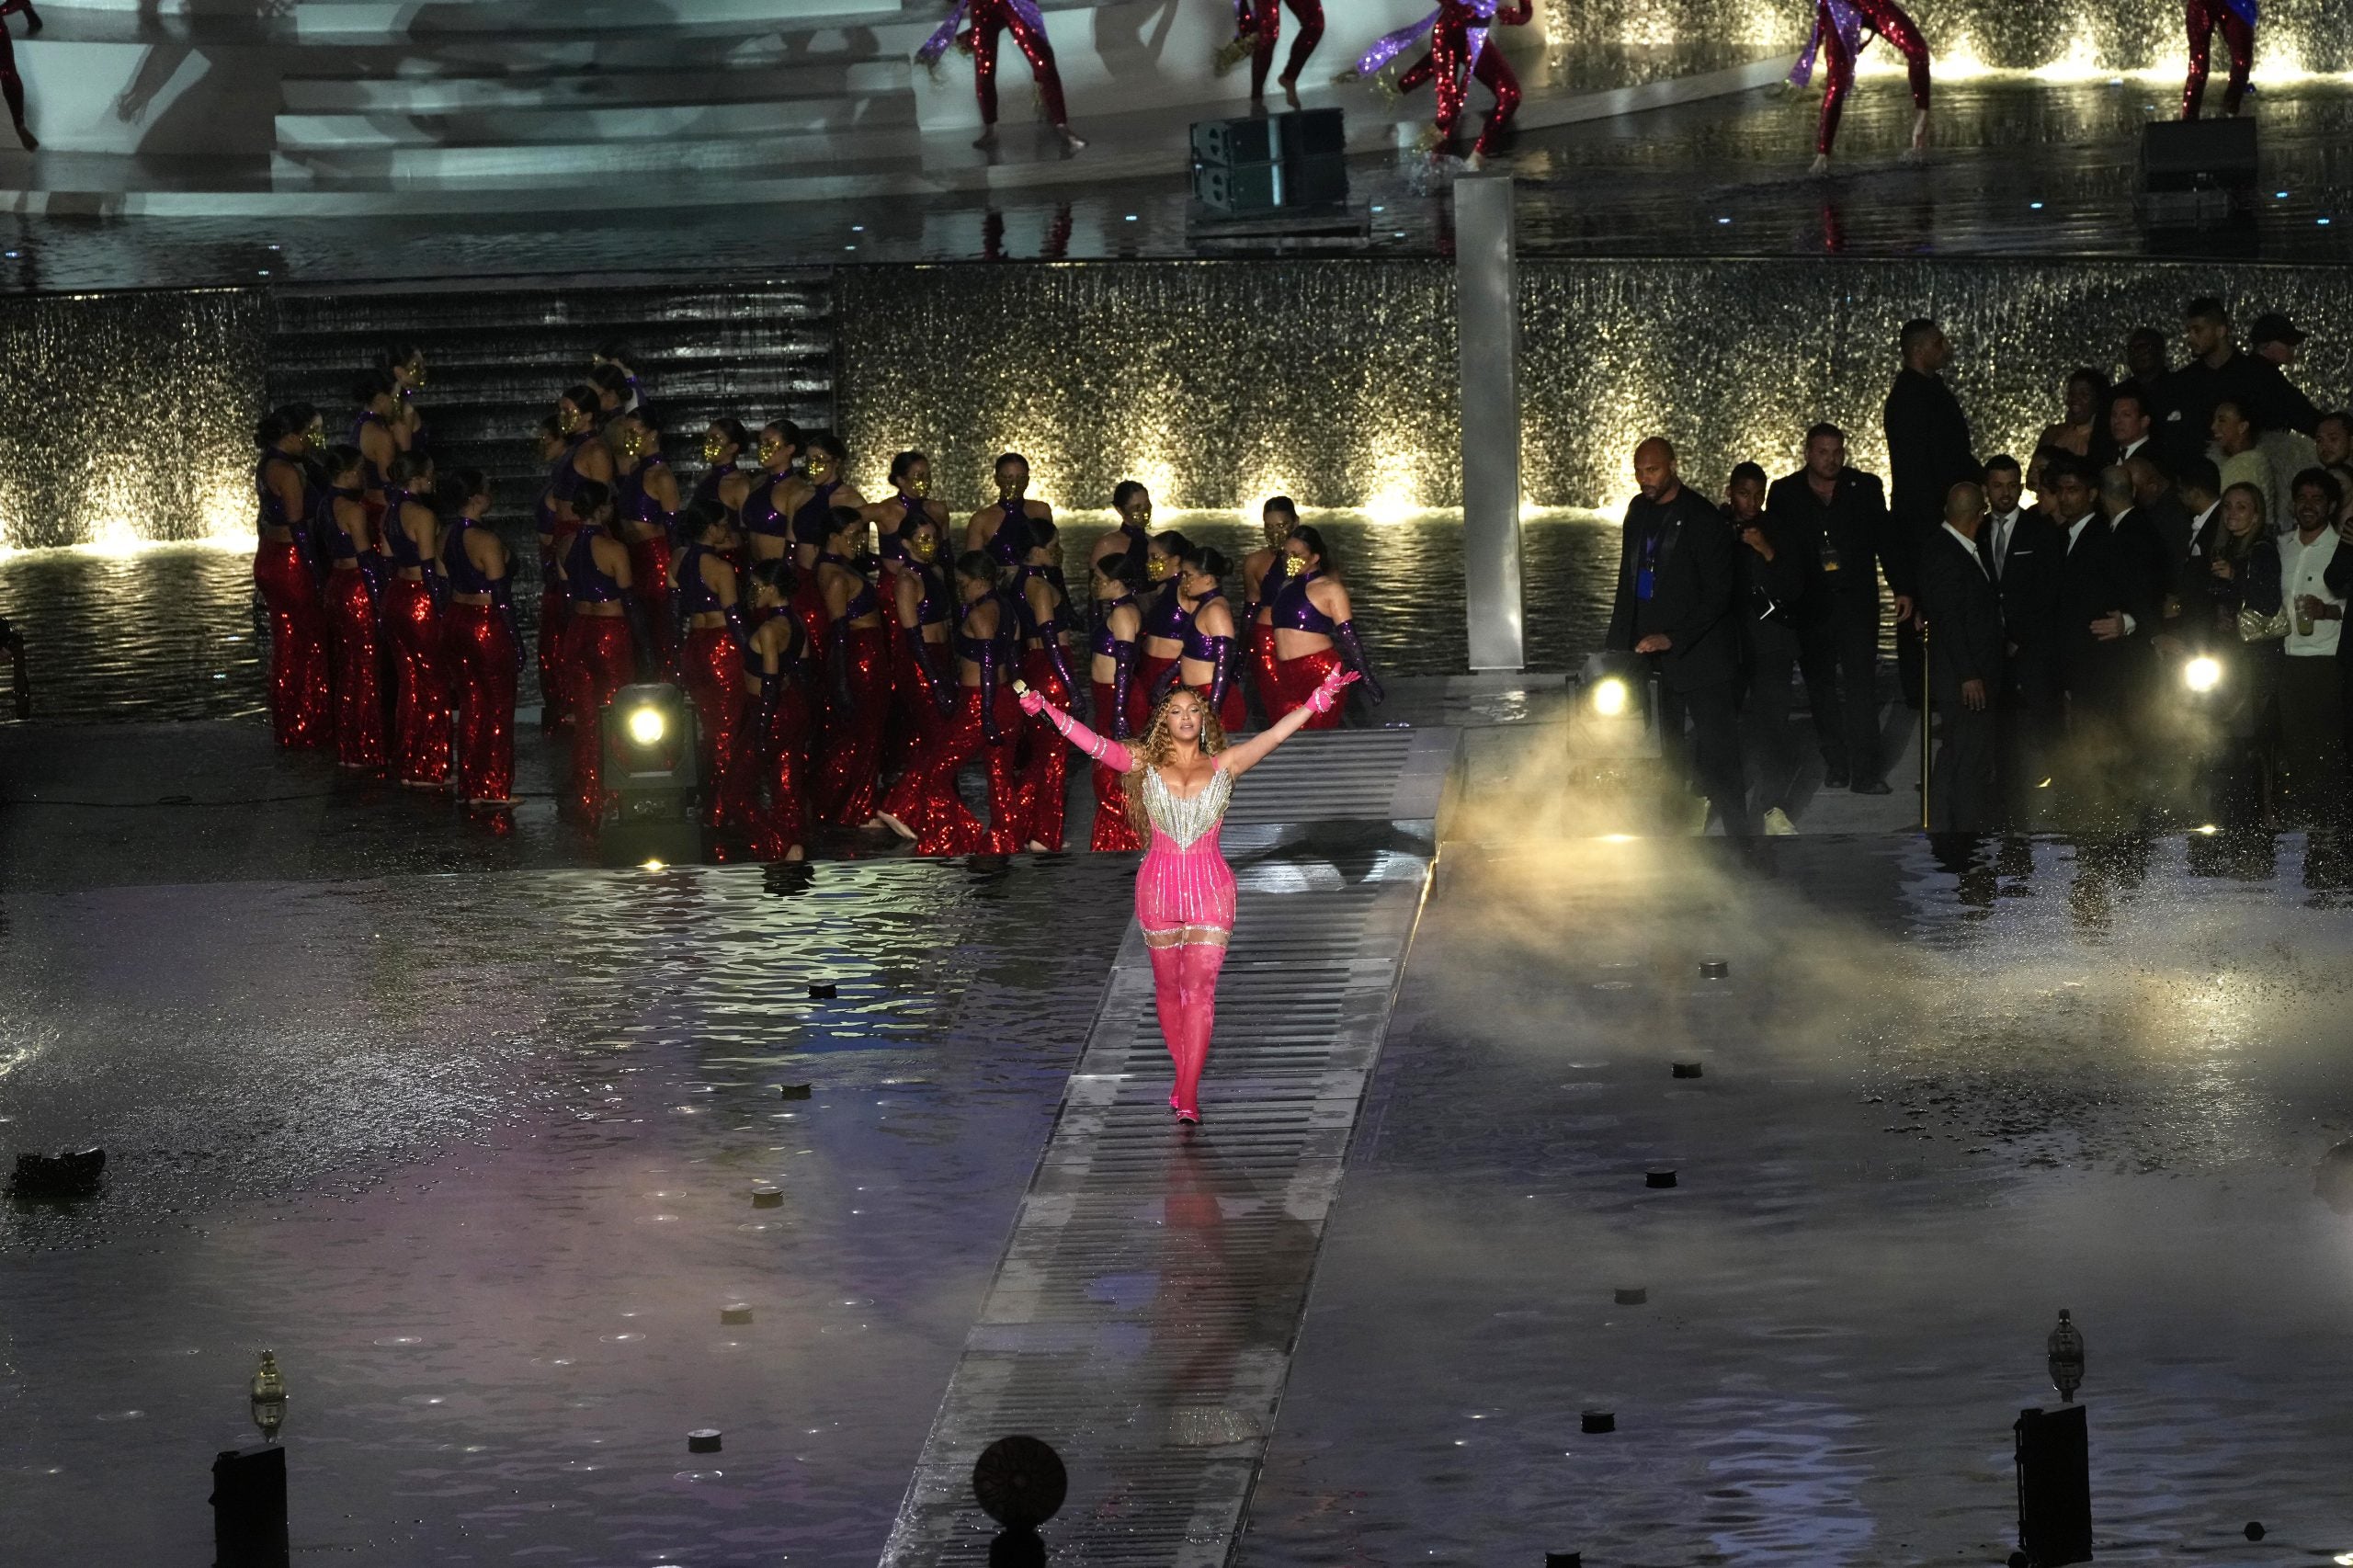 Beyoncé Returns To The Stage After A 5-Year Hiatus For The Grand Reveal of Atlantis The Royal in Dubai